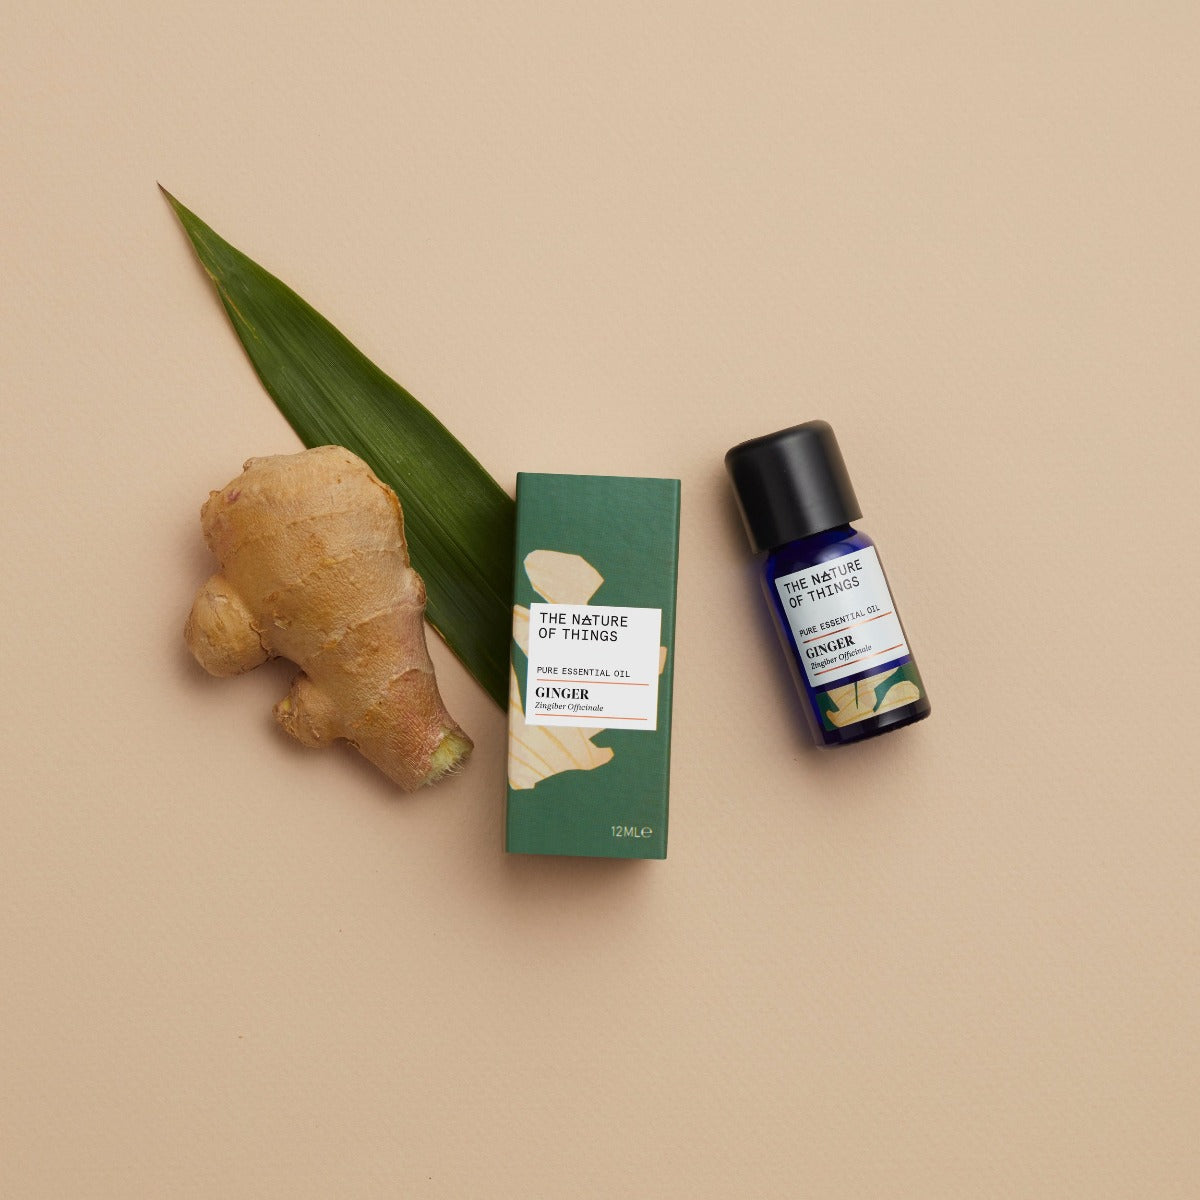 Organic Ginger Essential Oil from The Nature of Things